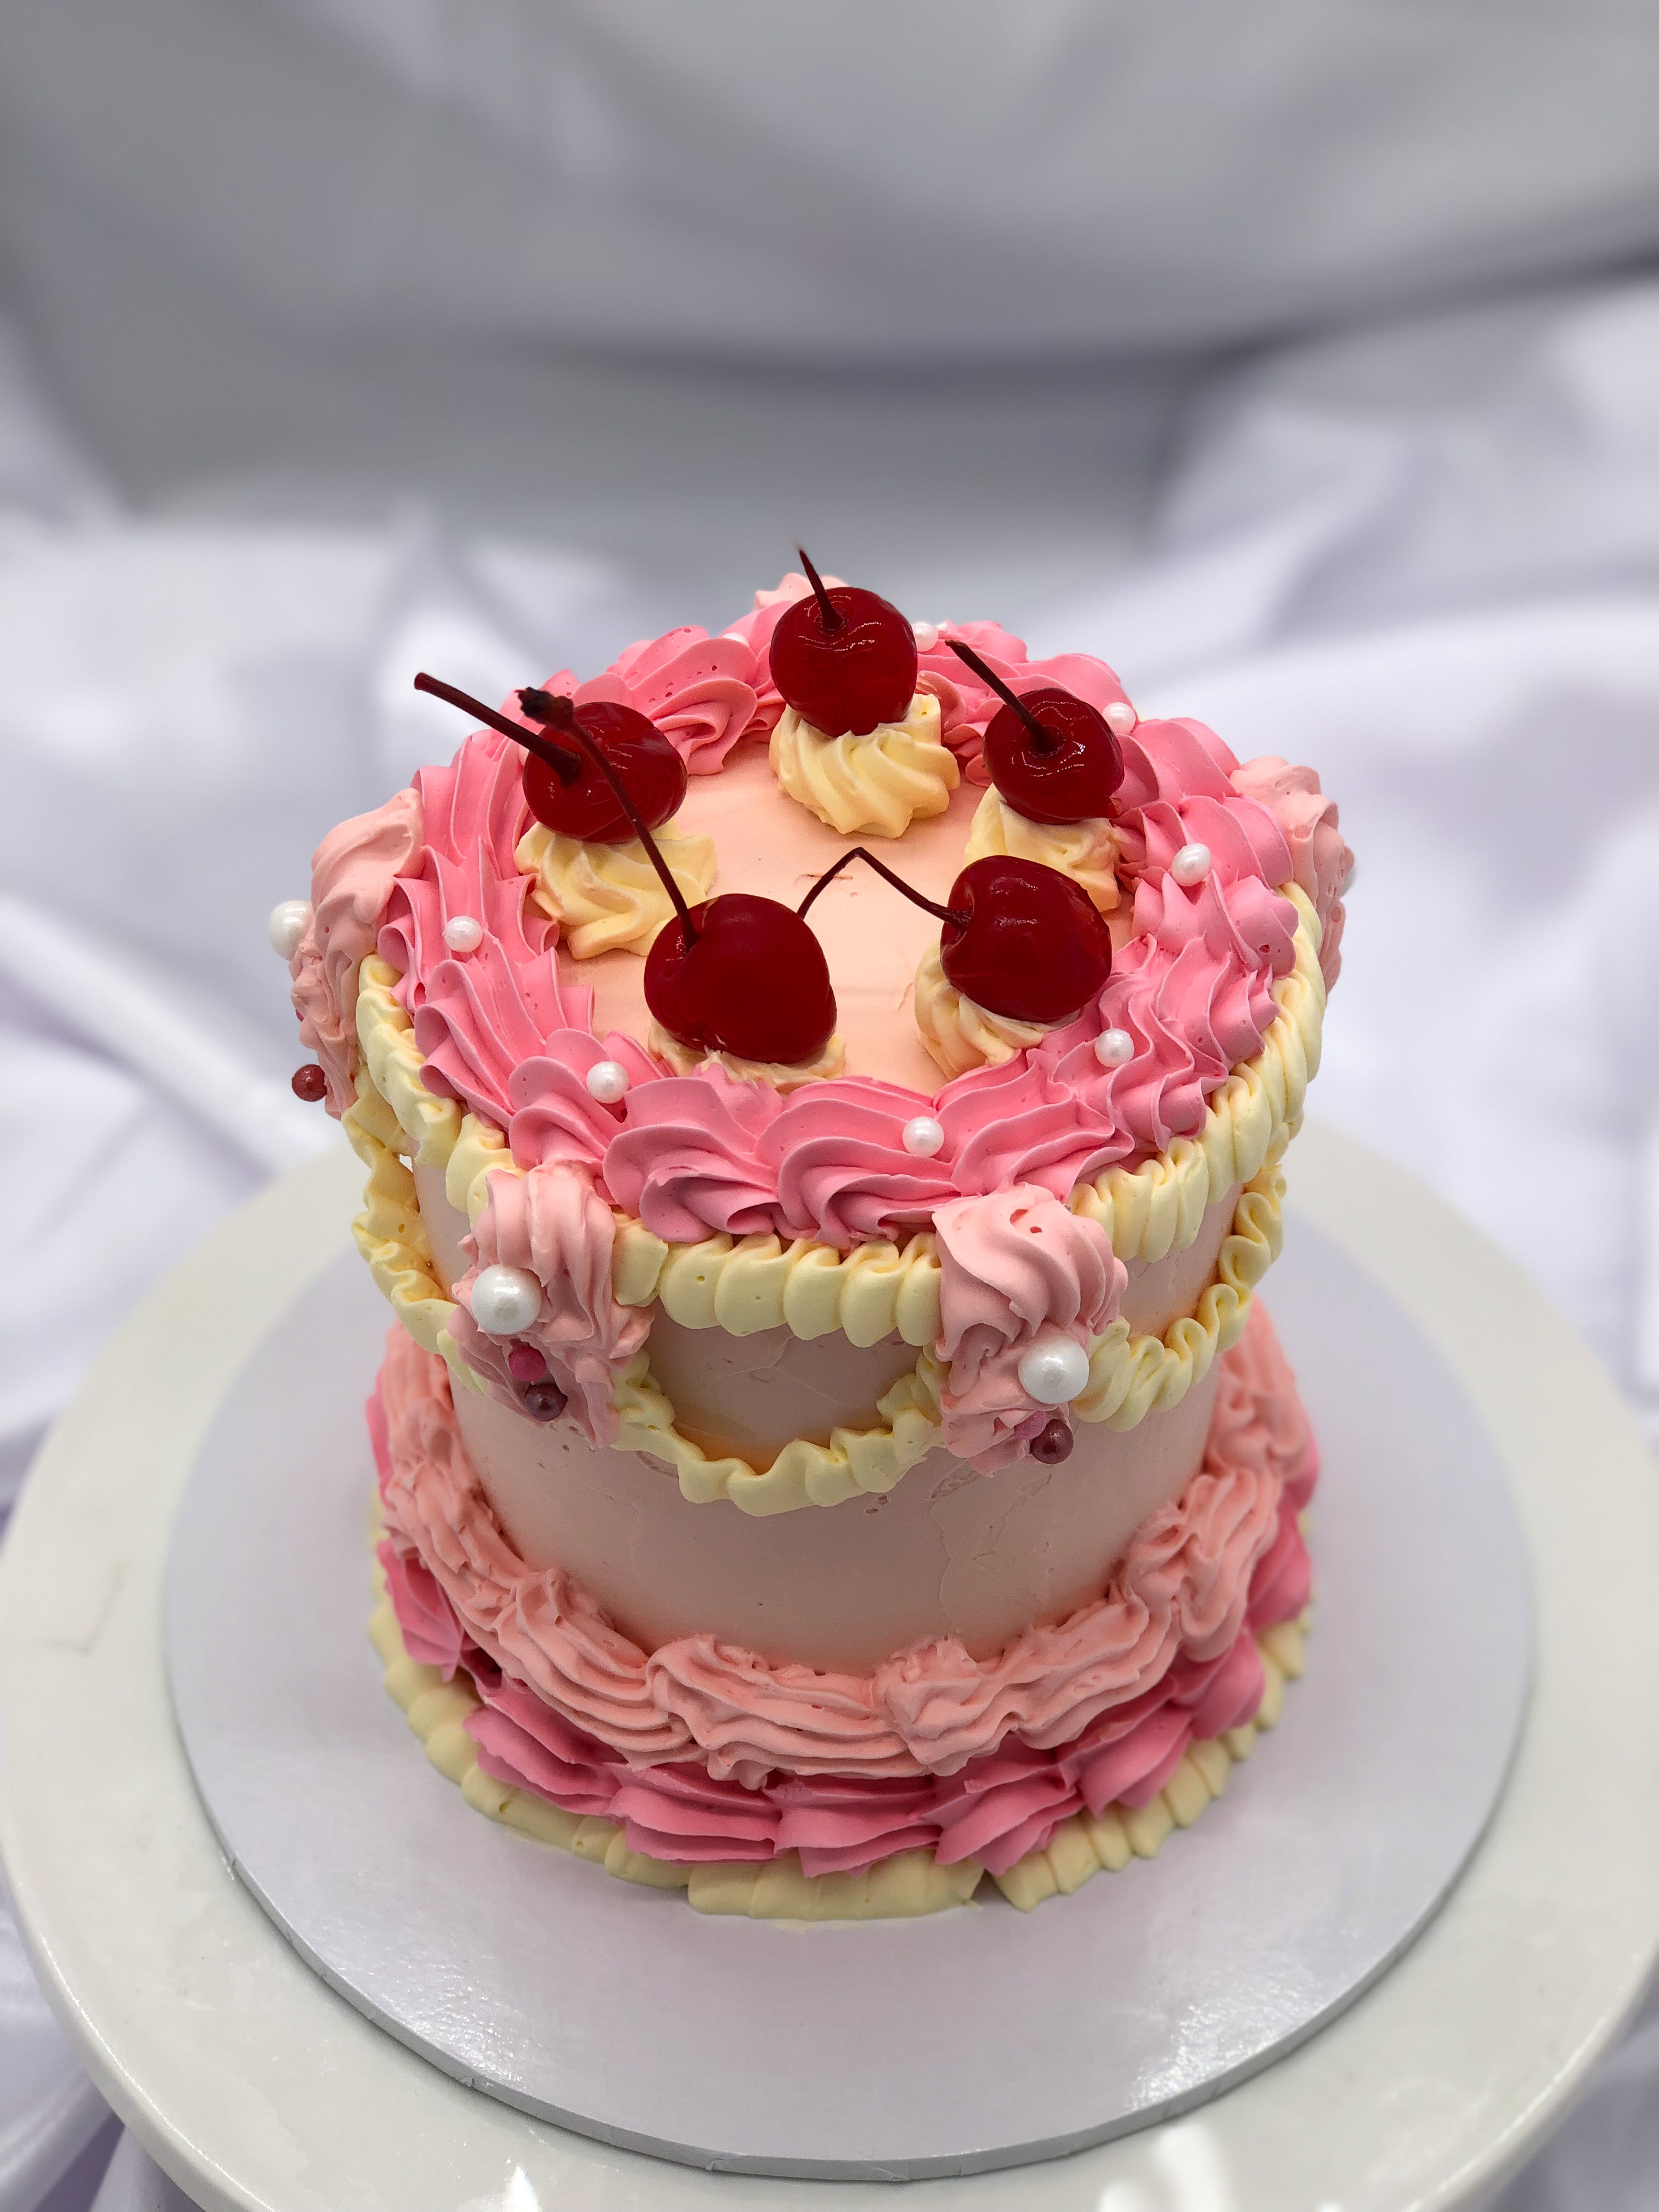 Strawberry Shortcake Cake (+Video) - The Country Cook